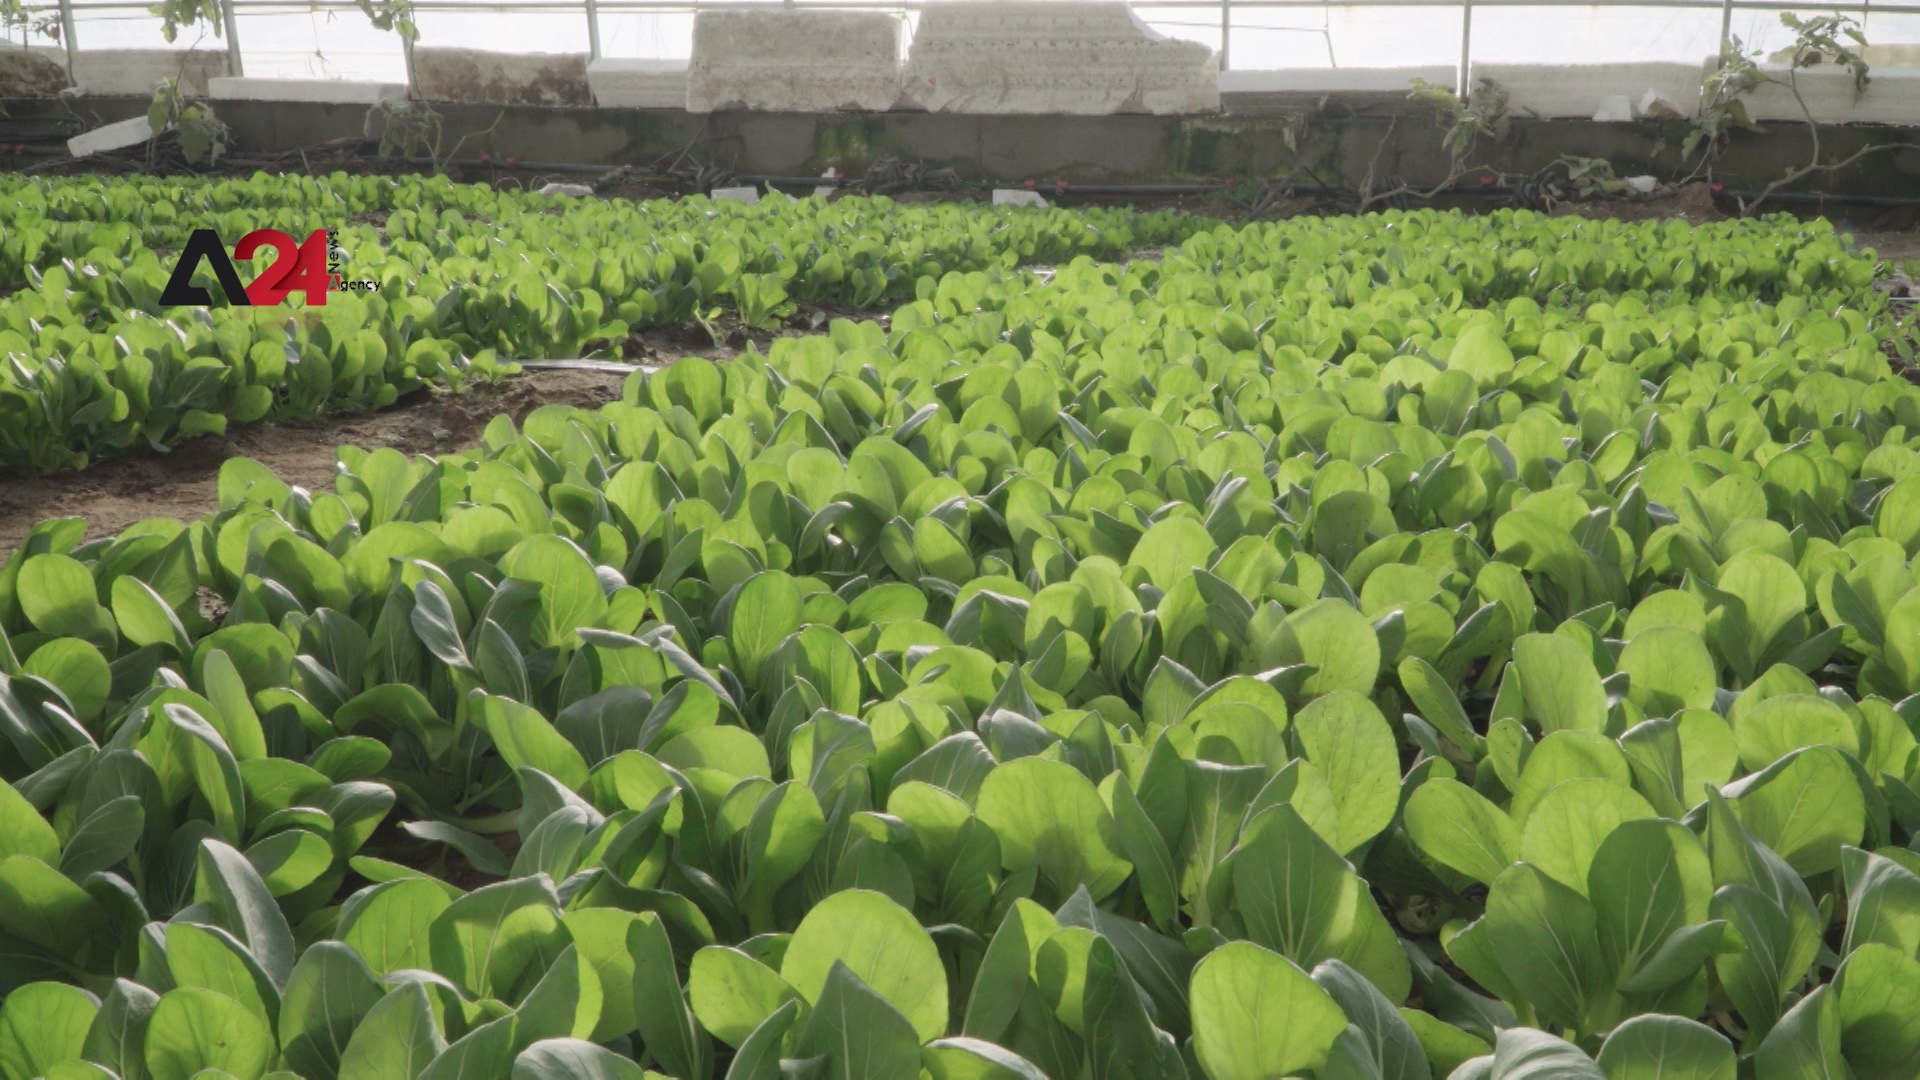 Mongolia – Mongolia needs to develop greenhouses to attain self-sufficiency